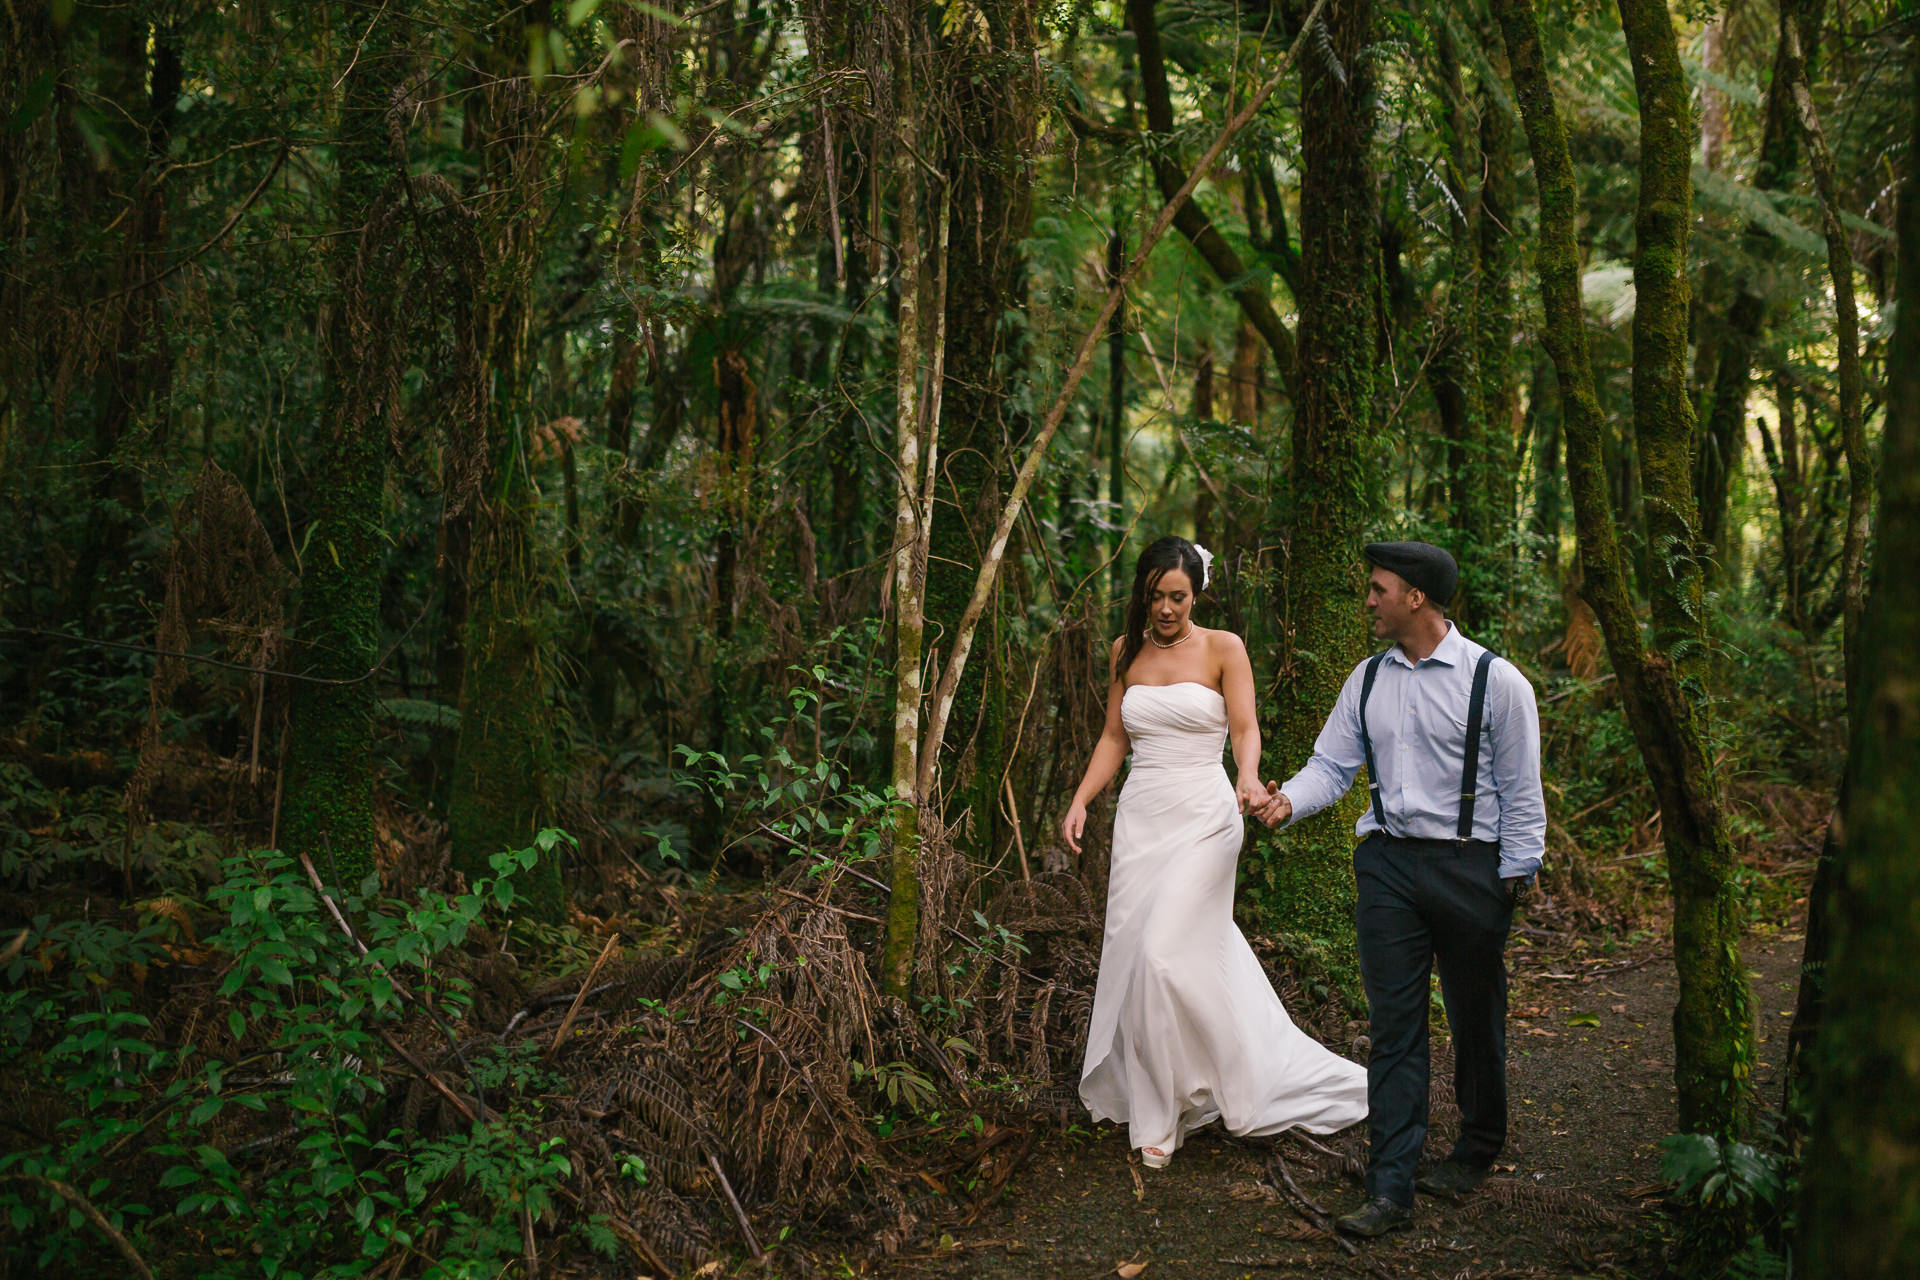 The_Official_Photographers_shannon-Noel-Pirongia-forest-park-wedding_MG_3934